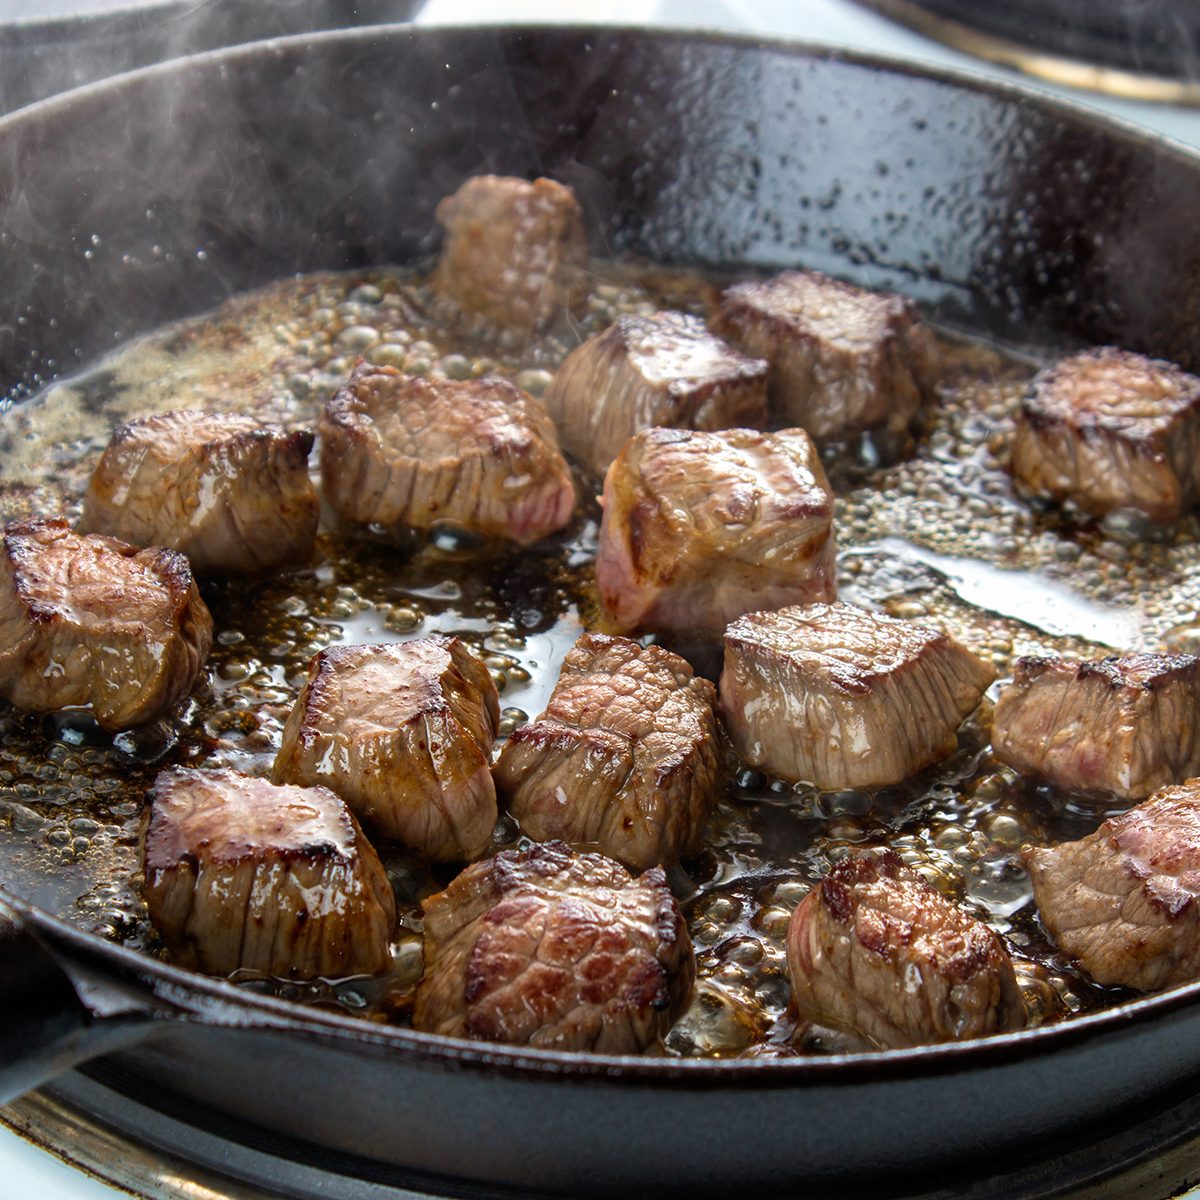 Frying beef bottom round roast cubes in cast iron skillet , meat flipped once